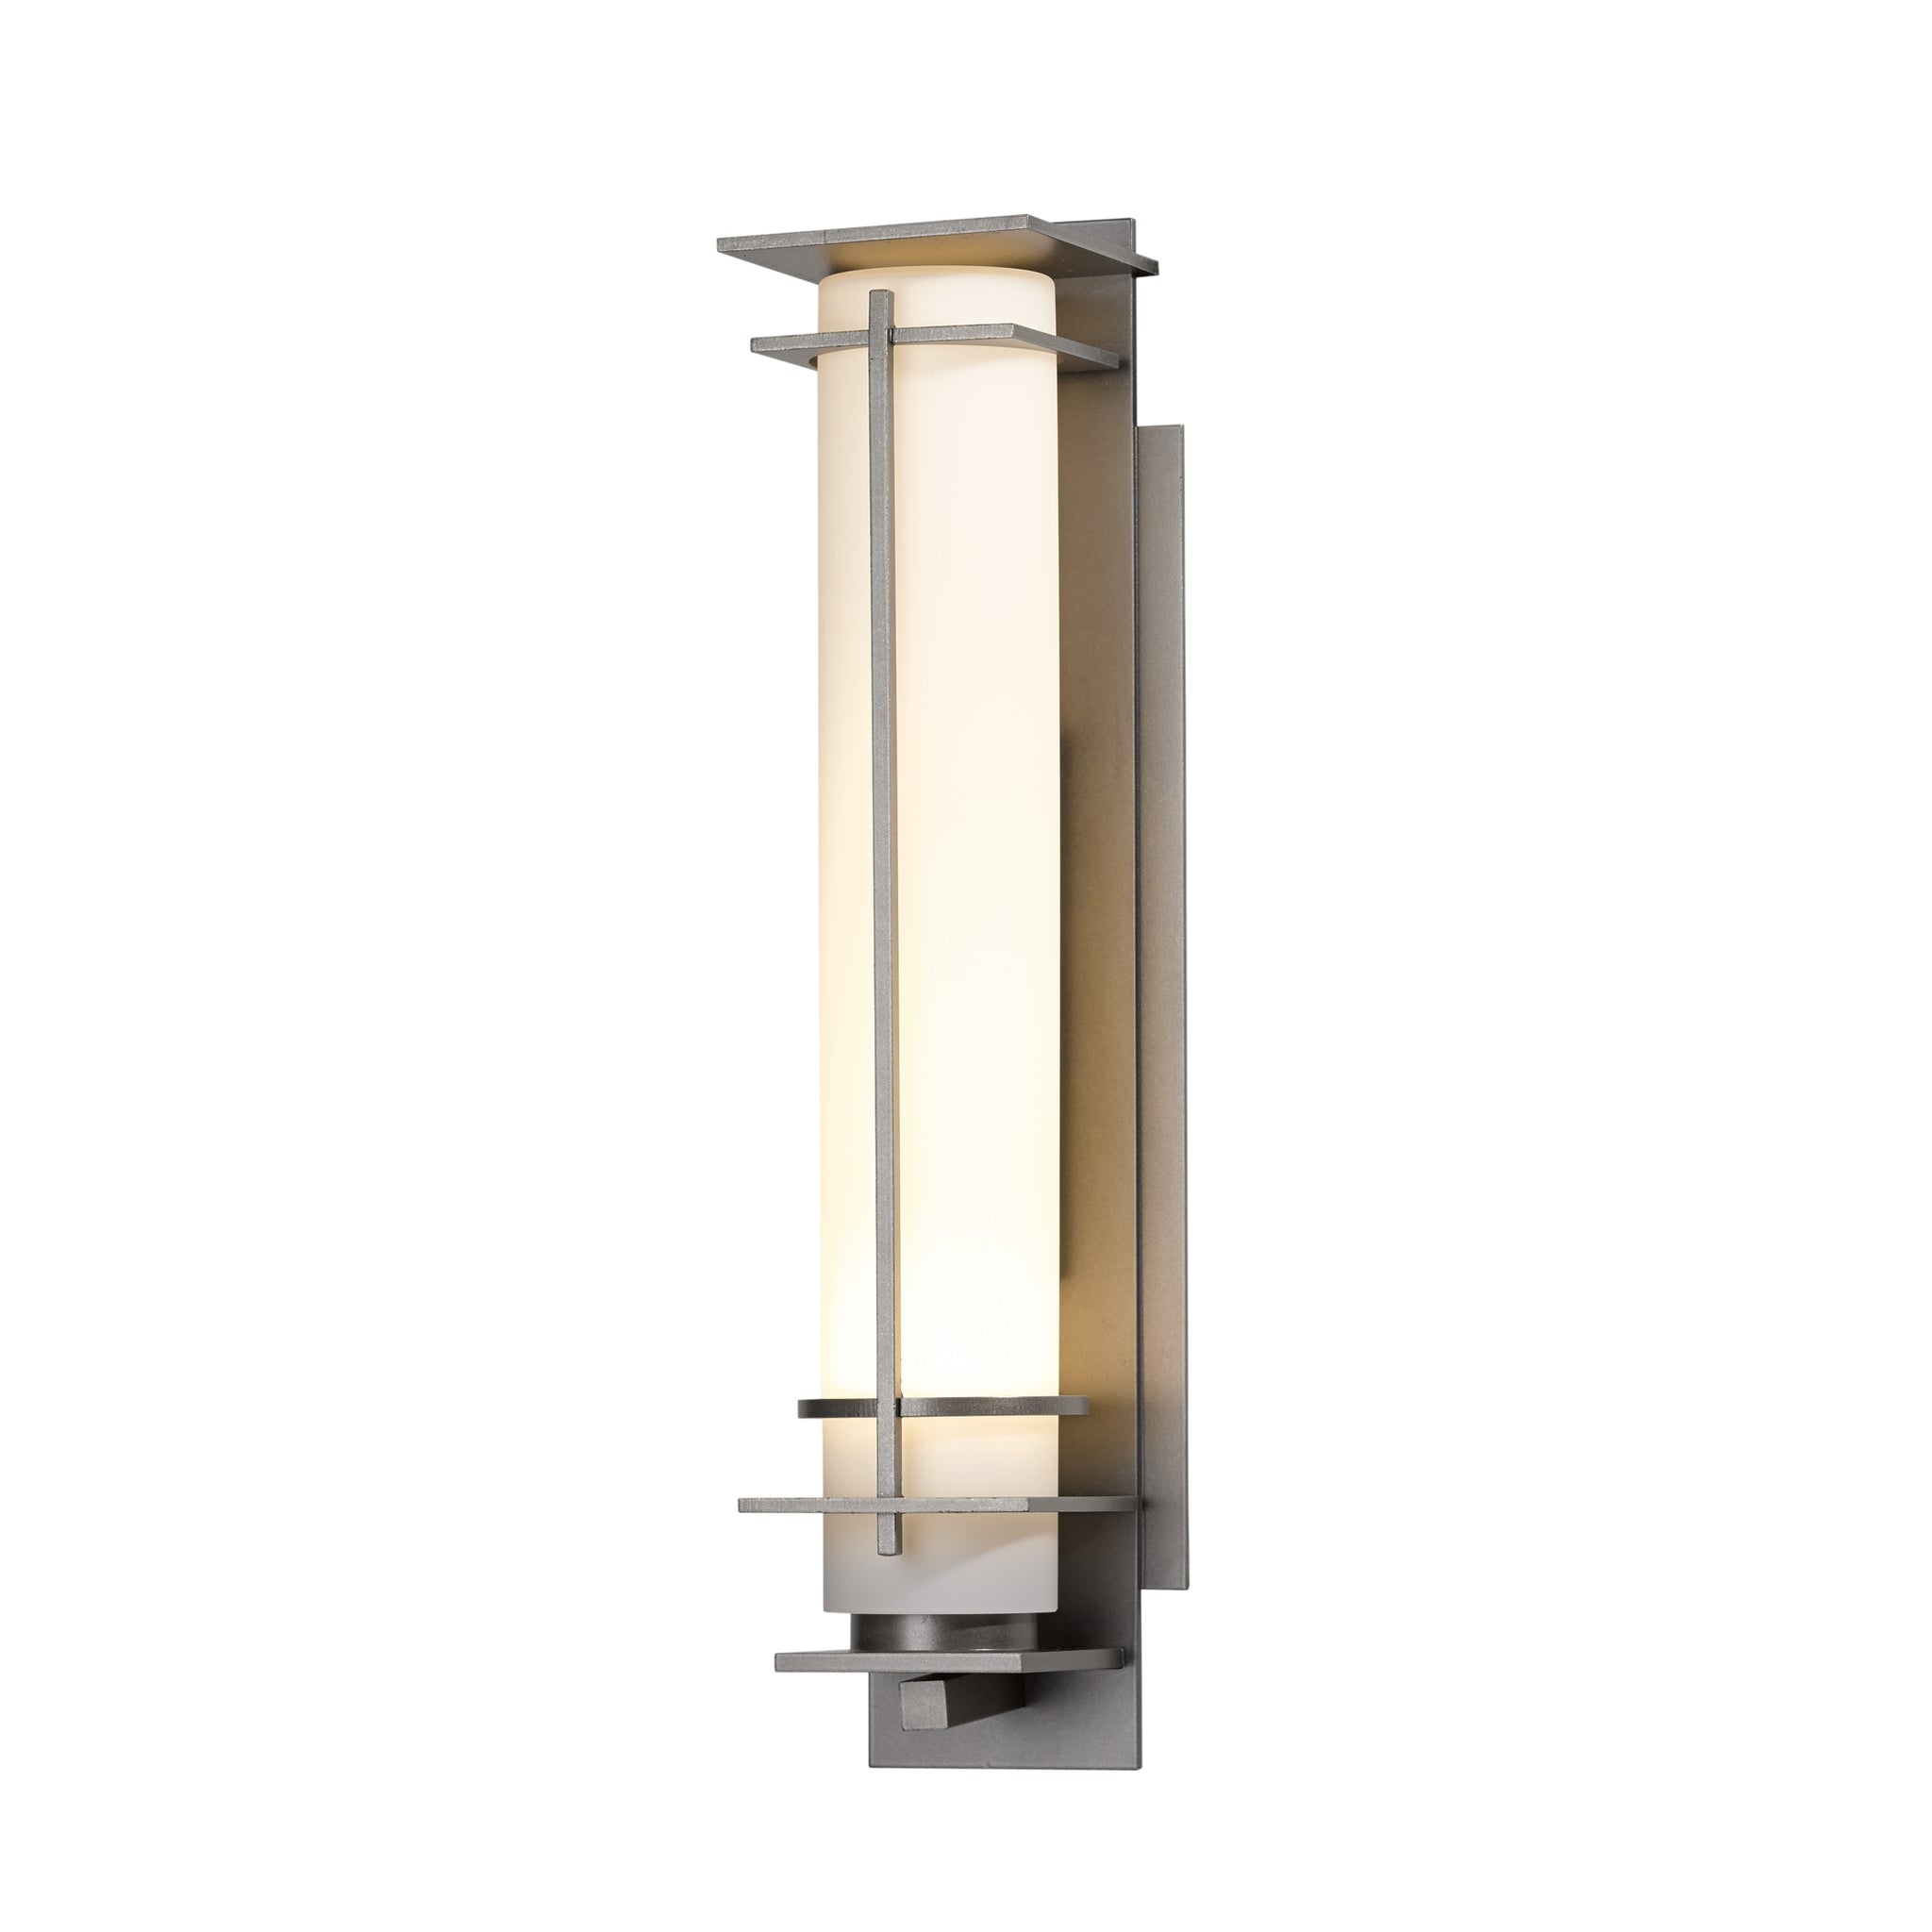 After Hours Outdoor-Wall-Light Coastal Burnished Steel (78)